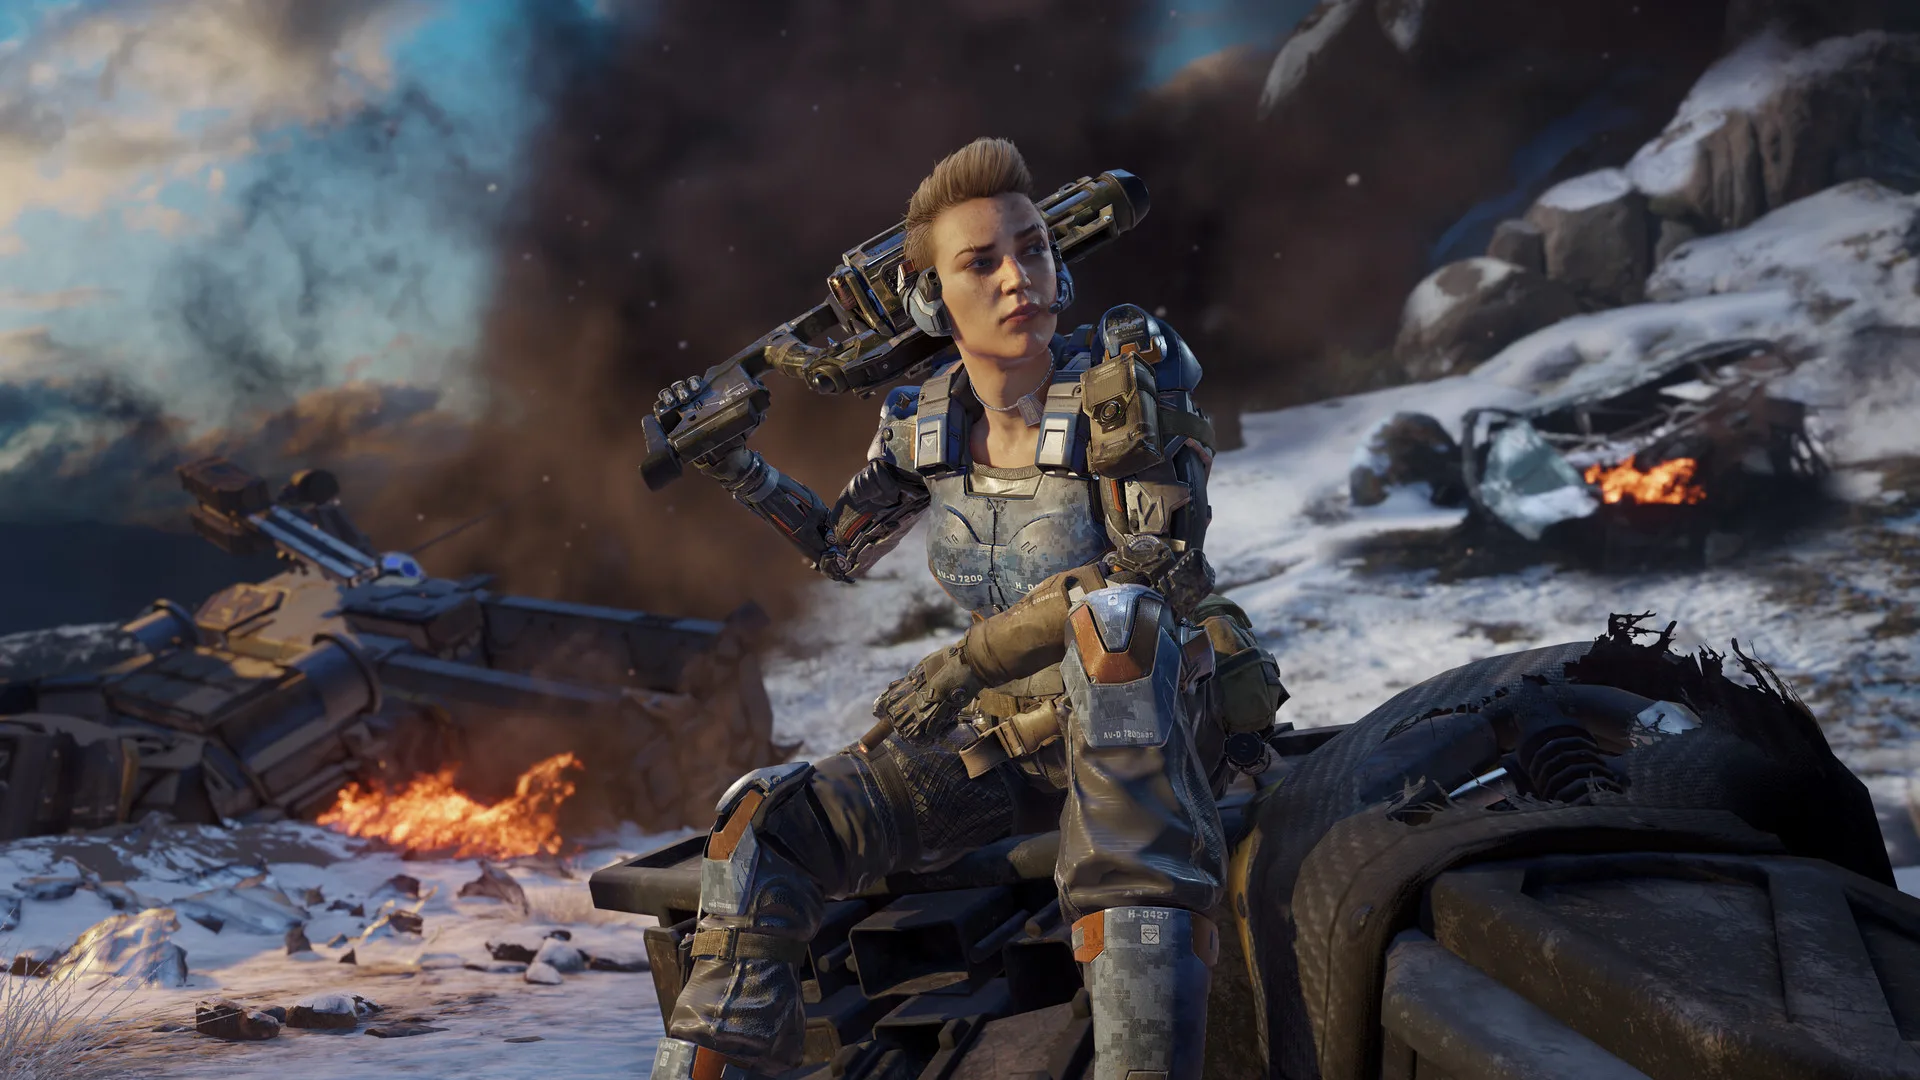 Call of Duty Black Ops 3 Torrent